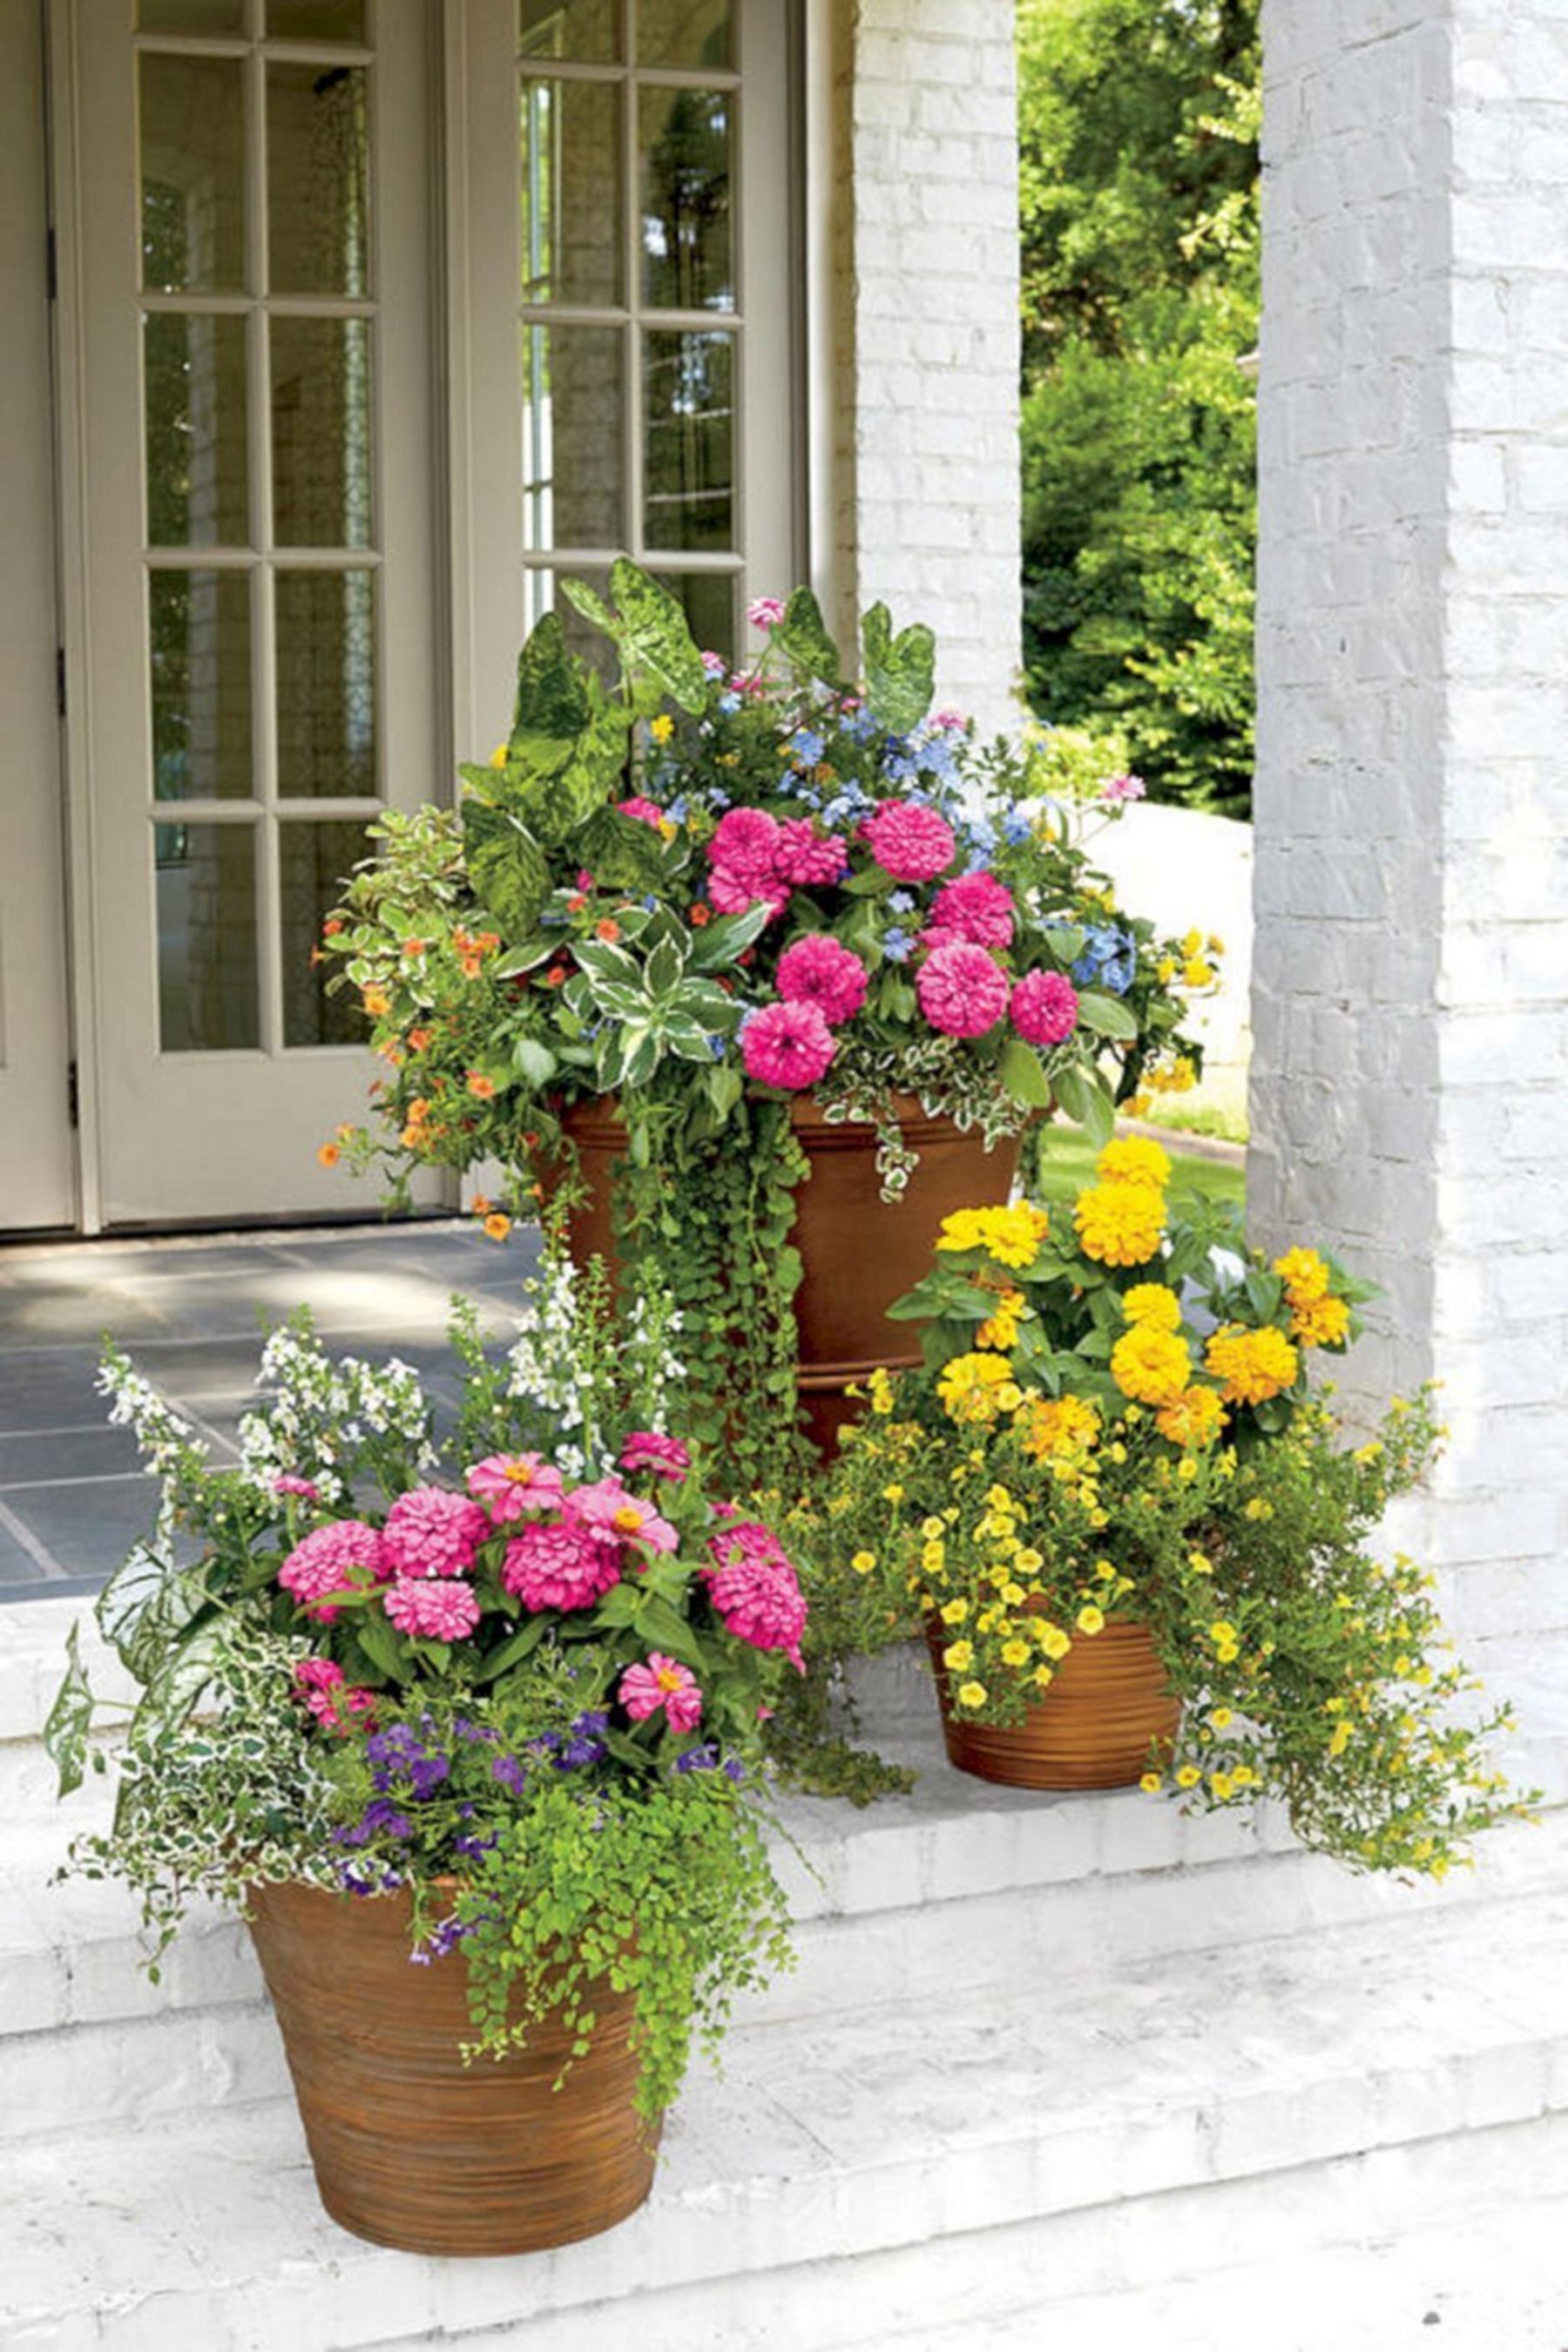 10+ Best Amazing Container Garden Ideas to Increase For Your Home Outdoor -   18 plants Outdoor ideas